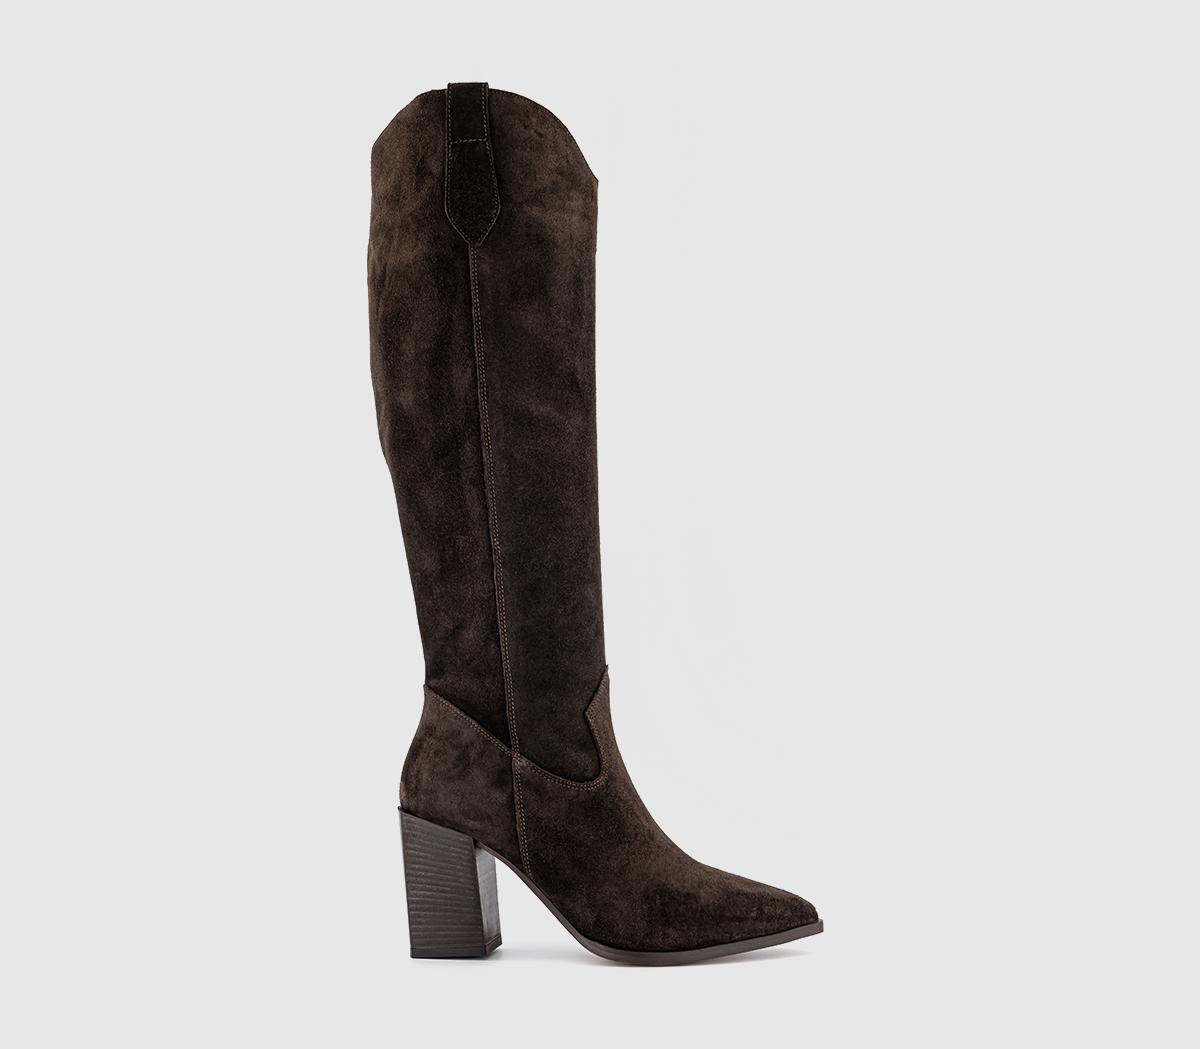 OFFICEKatarina Slouch Western Knee BootsBrown Suede